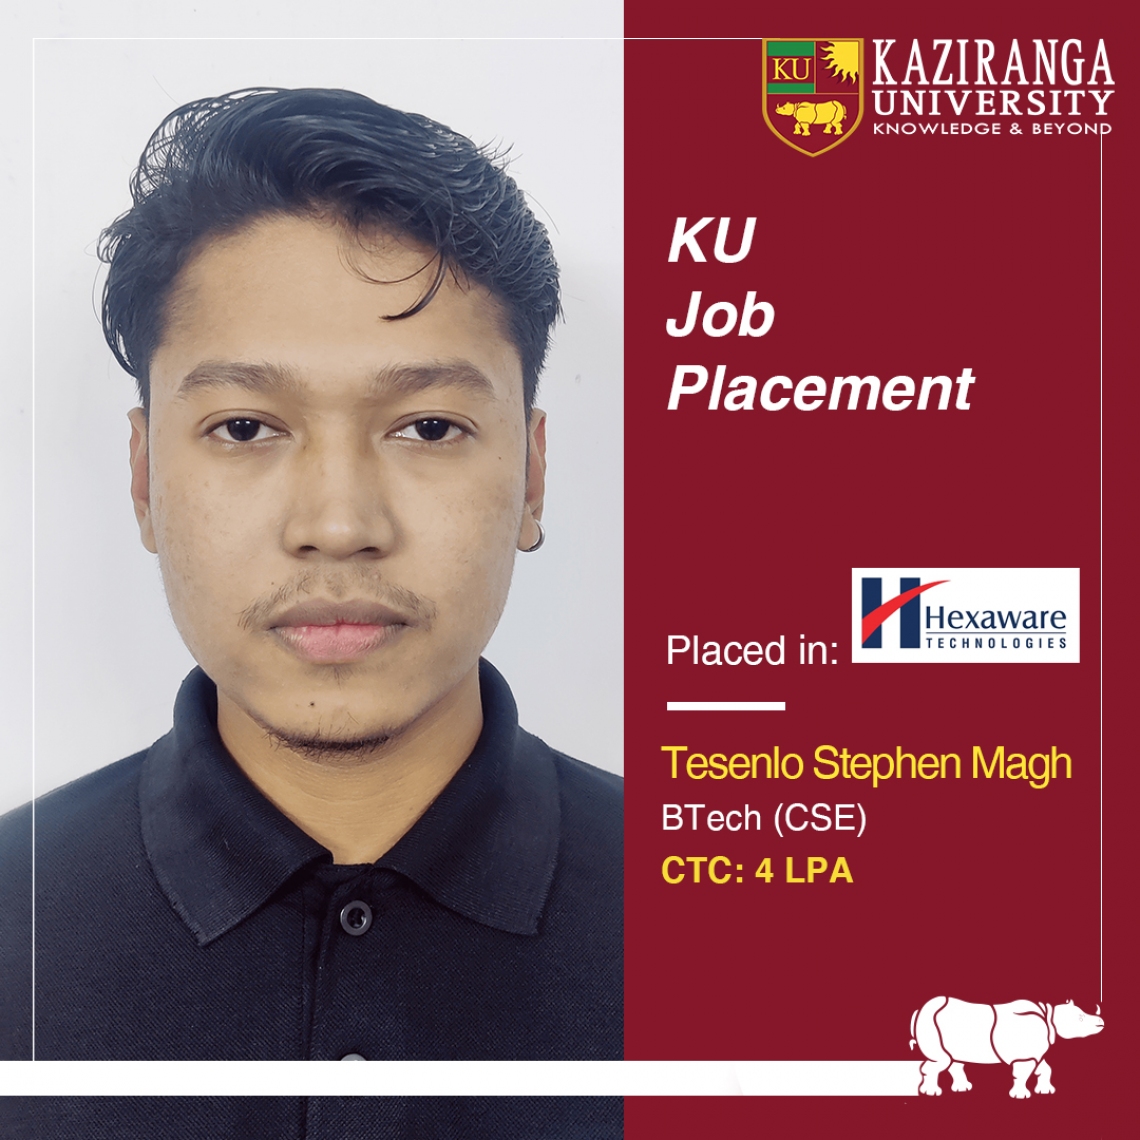 Congratulations to Tesenlo Stephen Magh on getting placed at M/s. Hexaware Technologies Ltd